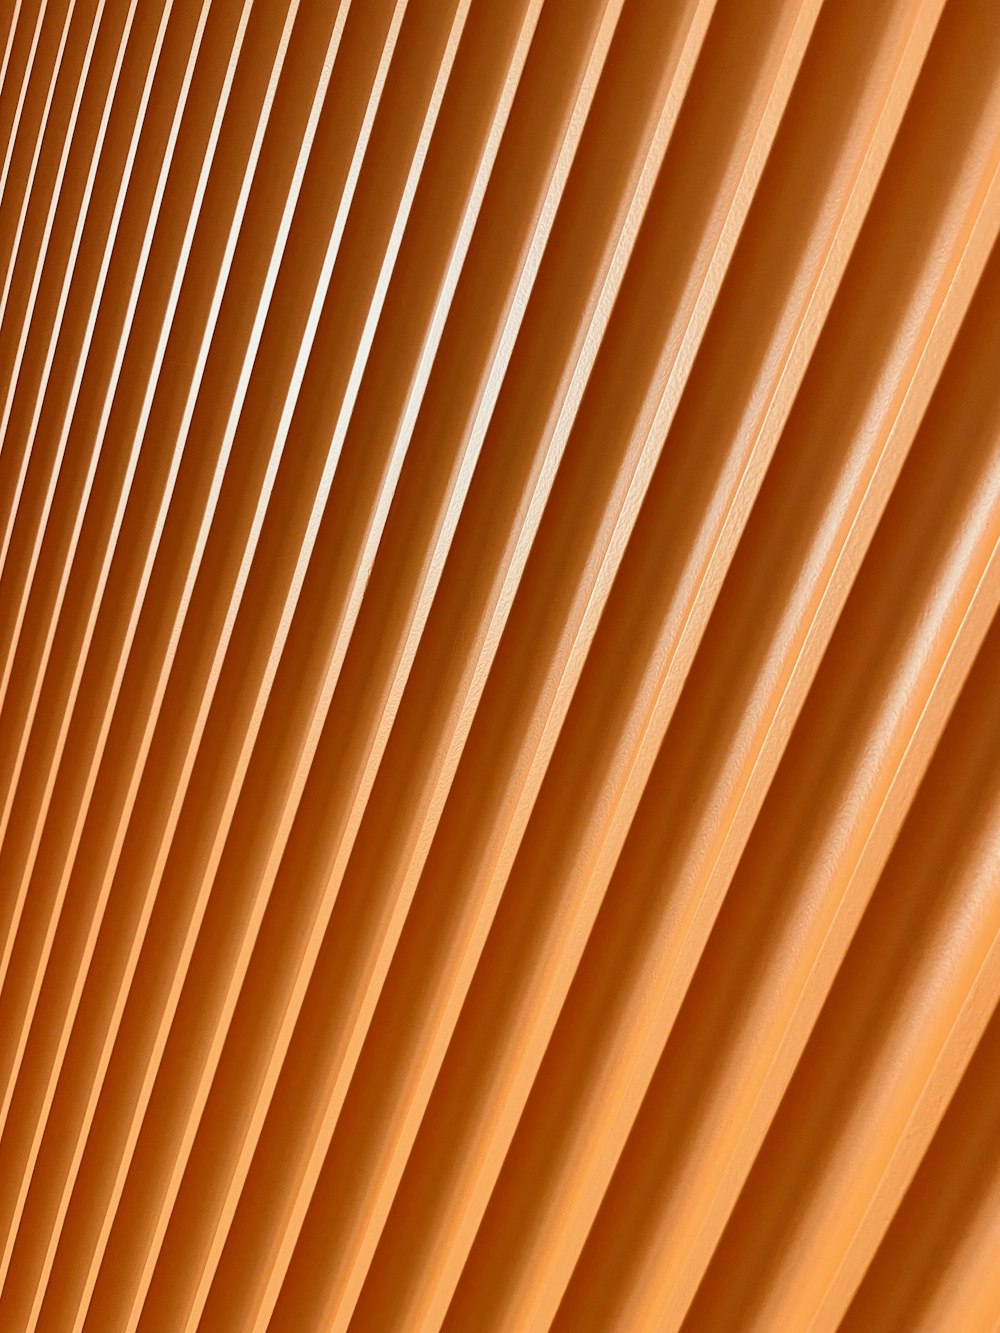 a close up view of a large orange object